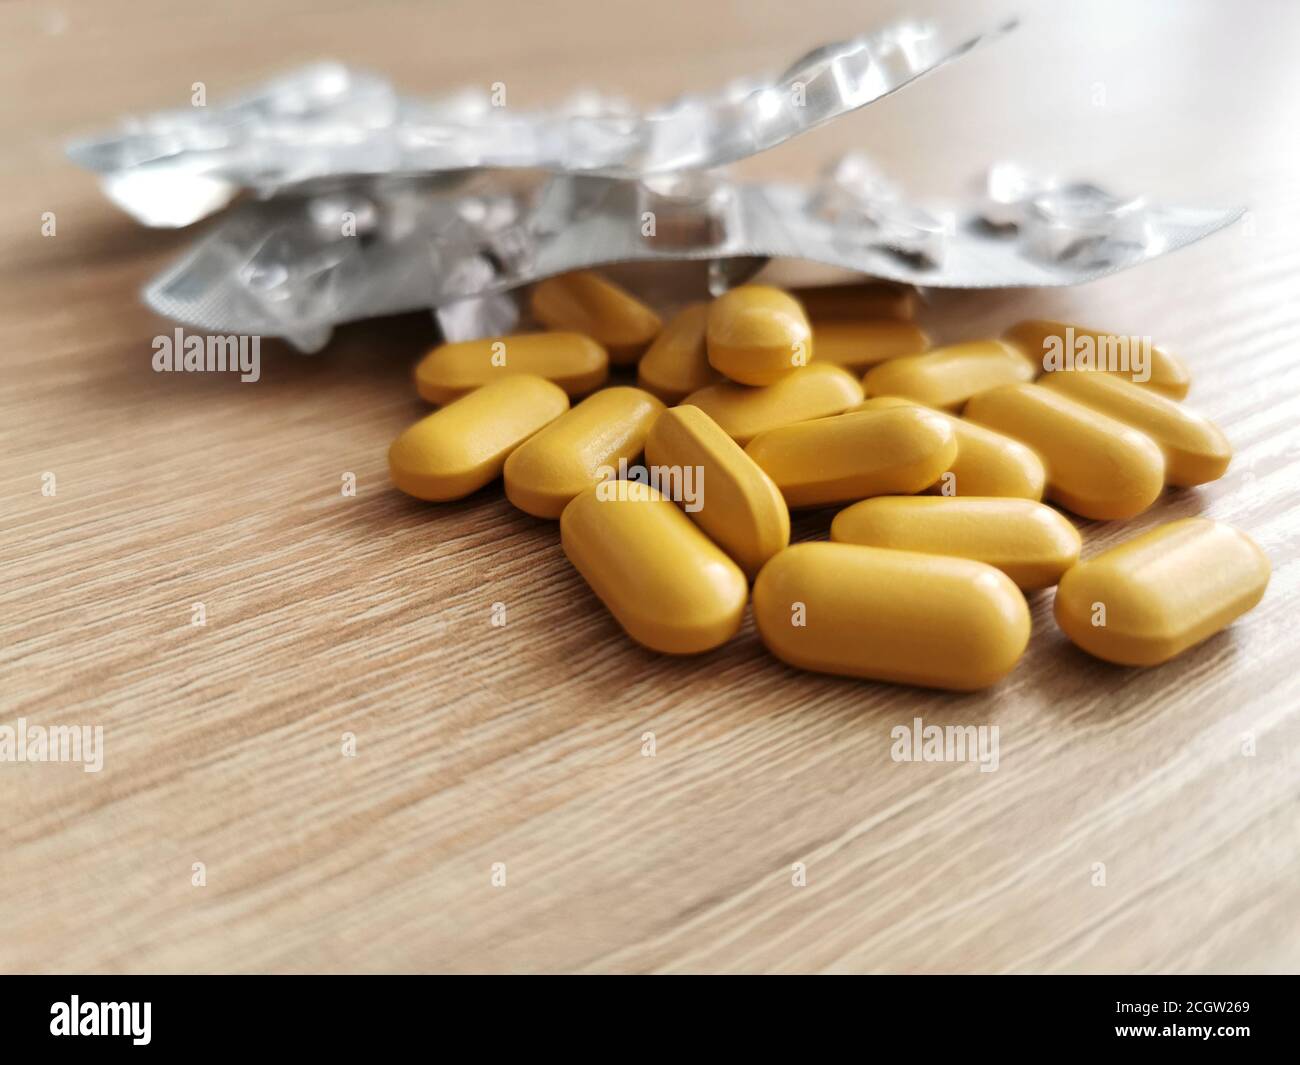 20 pills, two packs of tablets dietary supplements on wooden table. Stock Photo